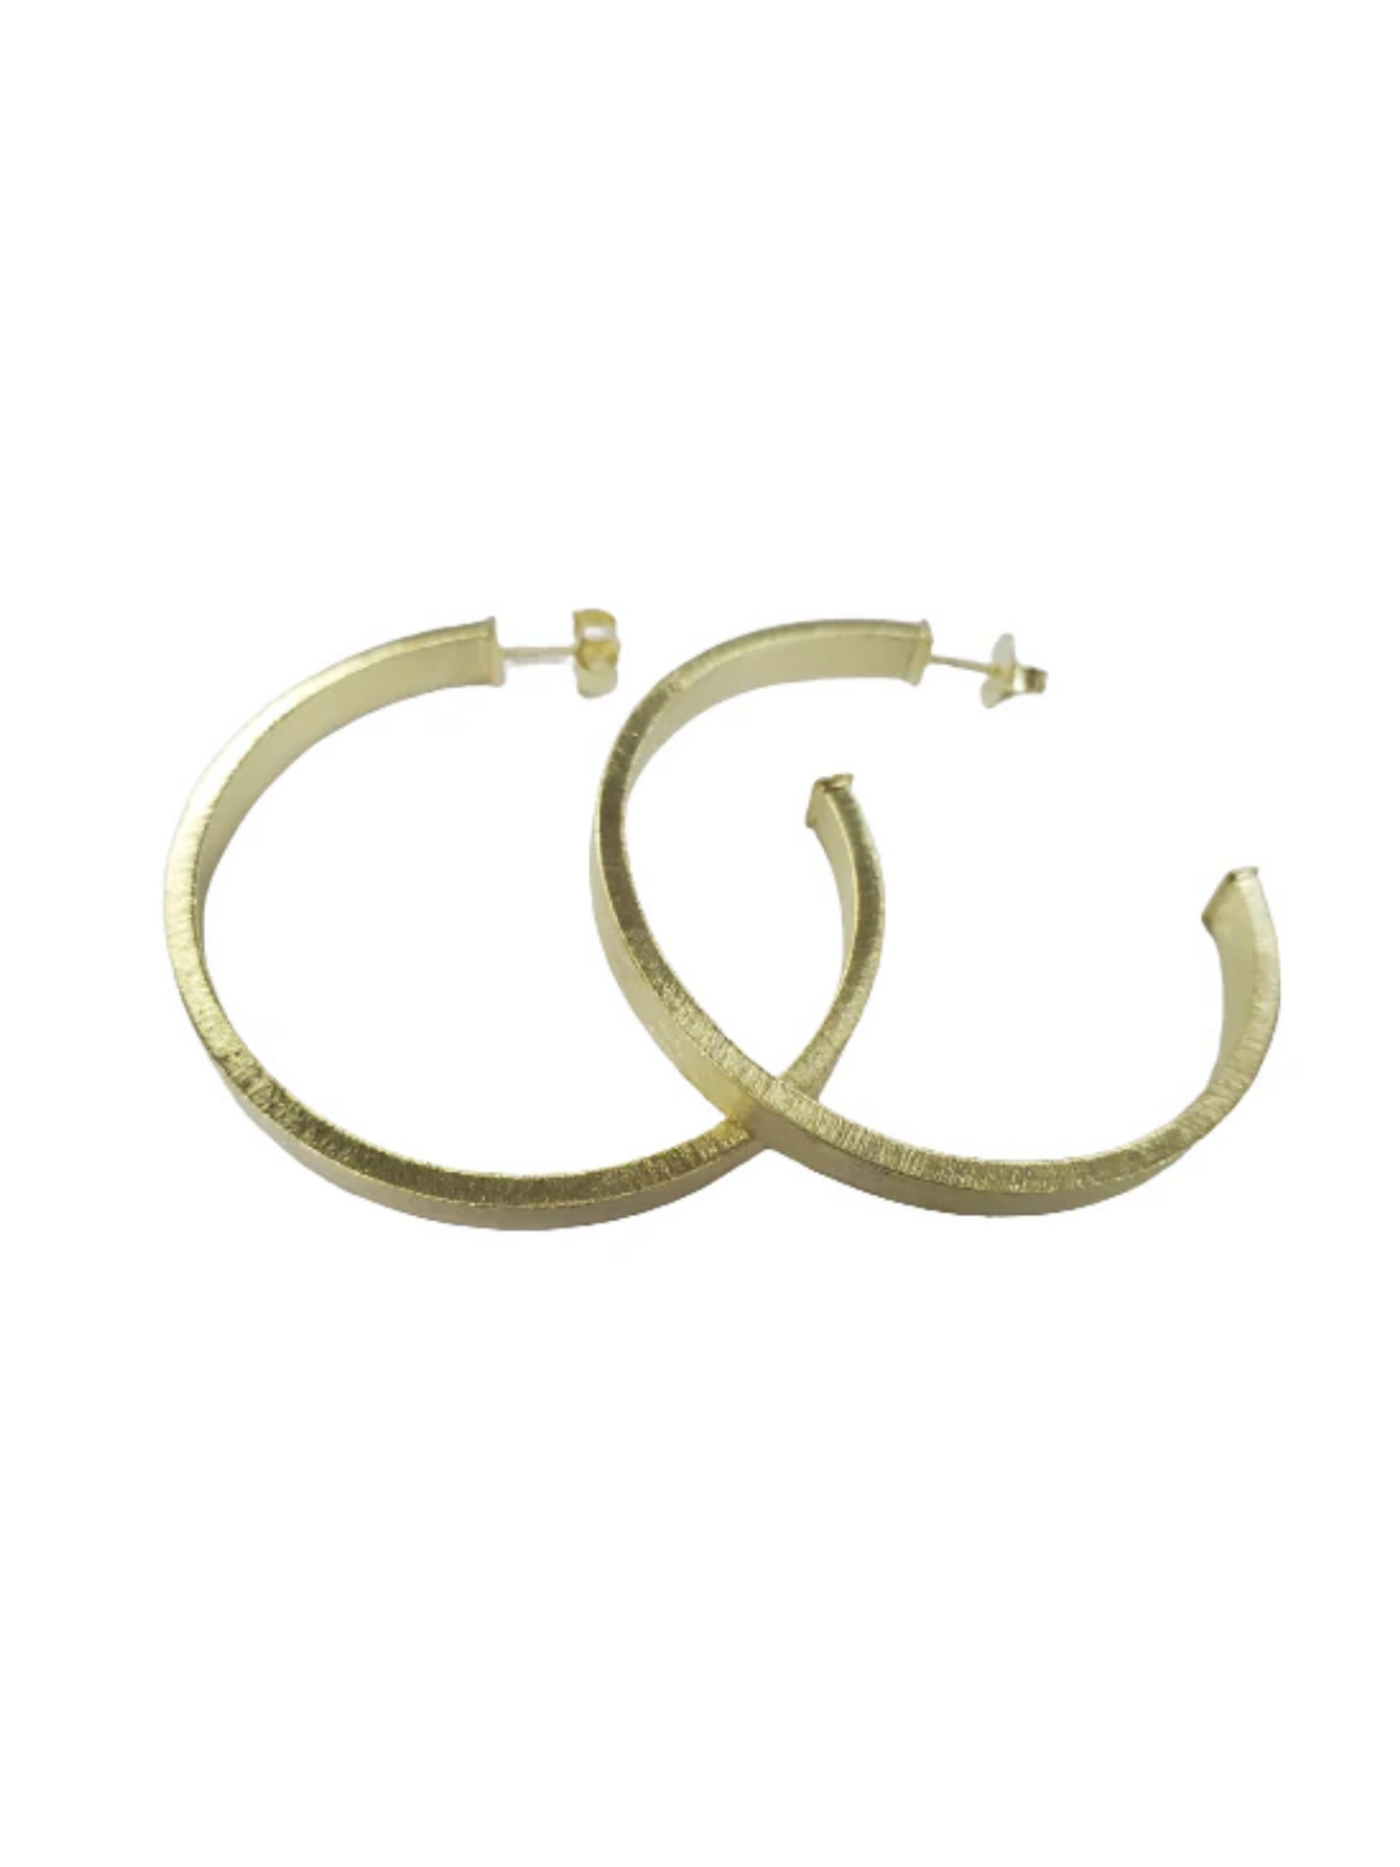 Shelia Fajl Small Lunaria Hoops in scratched Gold on white background.